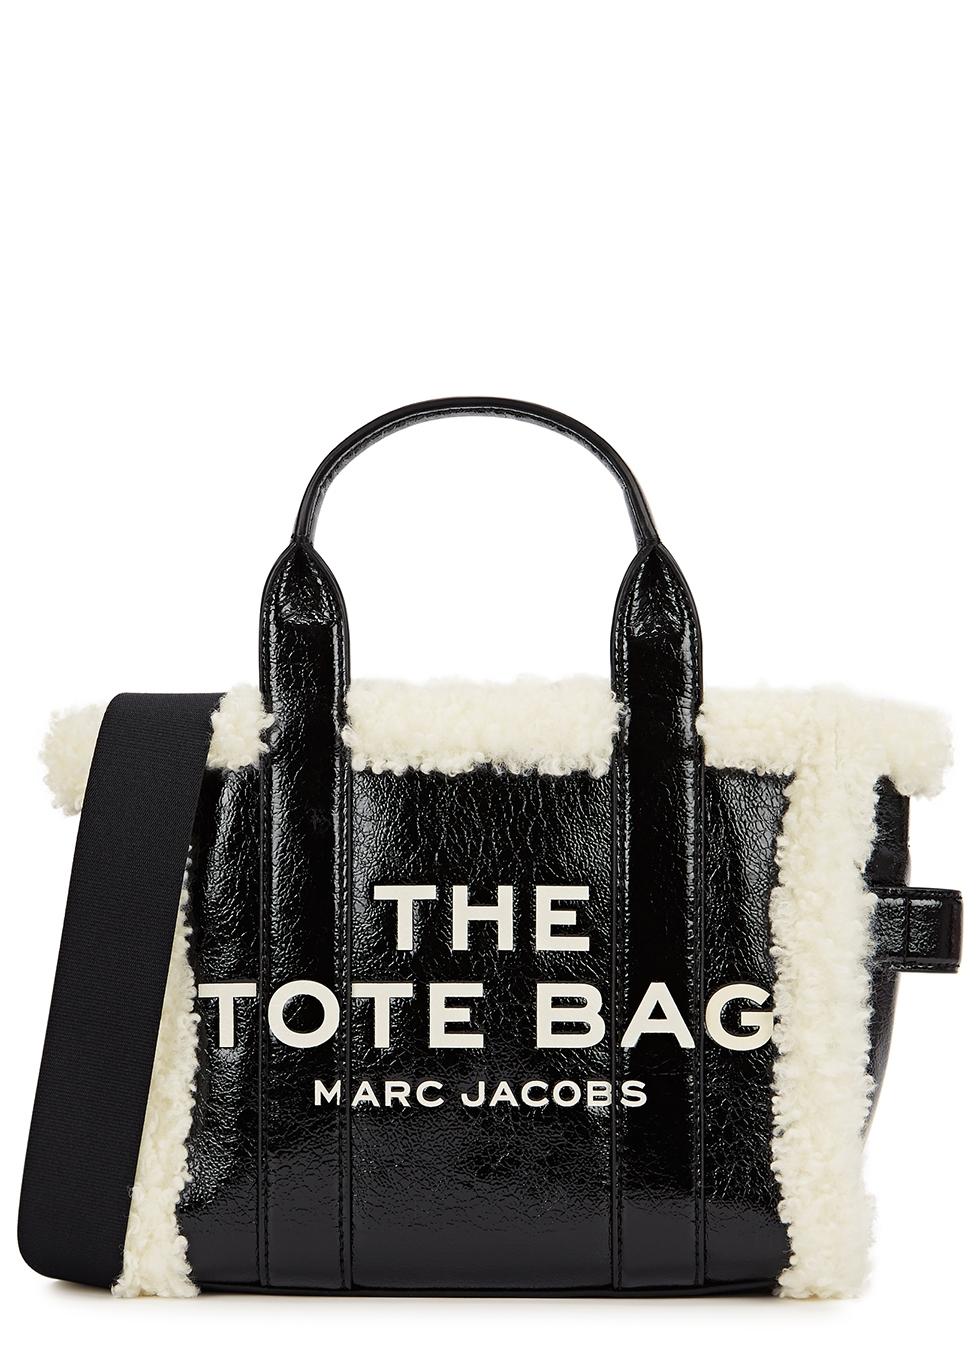 The Mini Leather Tote Bag in Black - Marc Jacobs